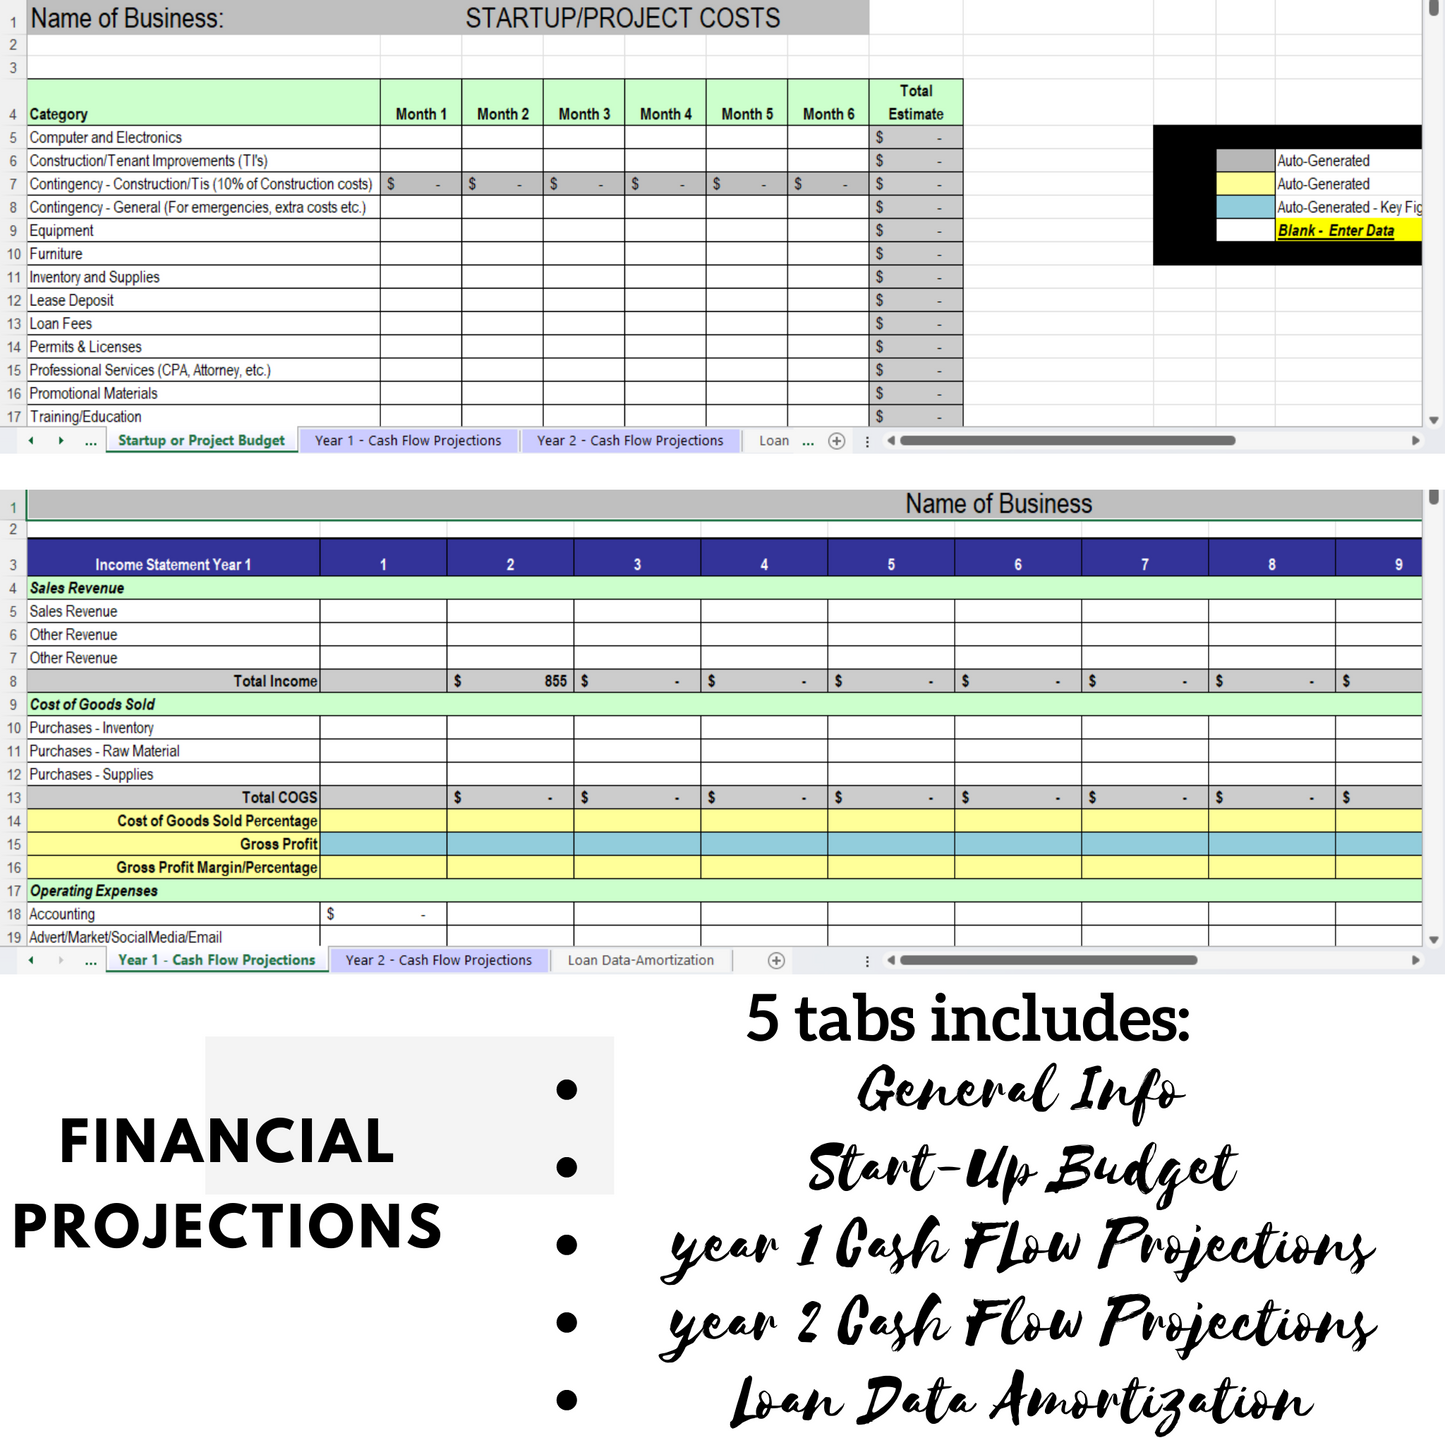 Business Plan + Financial Statement + Marketing + Business Overview Templates in PDF Printable Canva Small Business